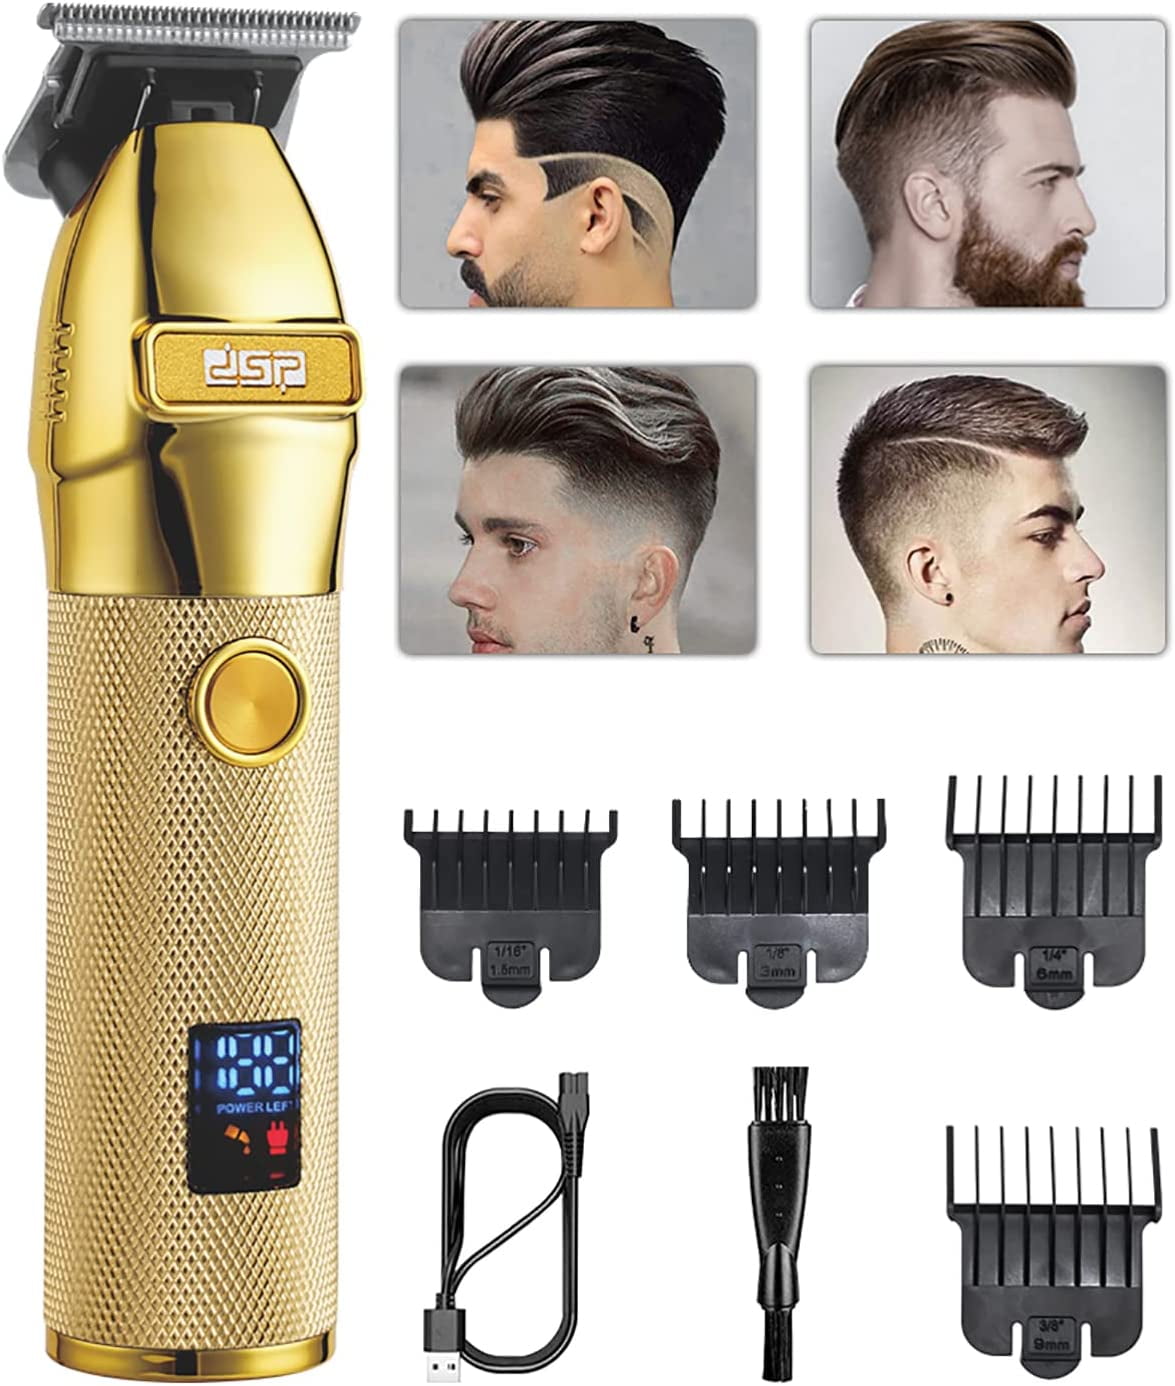 DSP Rechargeable Hair Trimmer for Men Gold Hair Cutting Machine with 4 ...